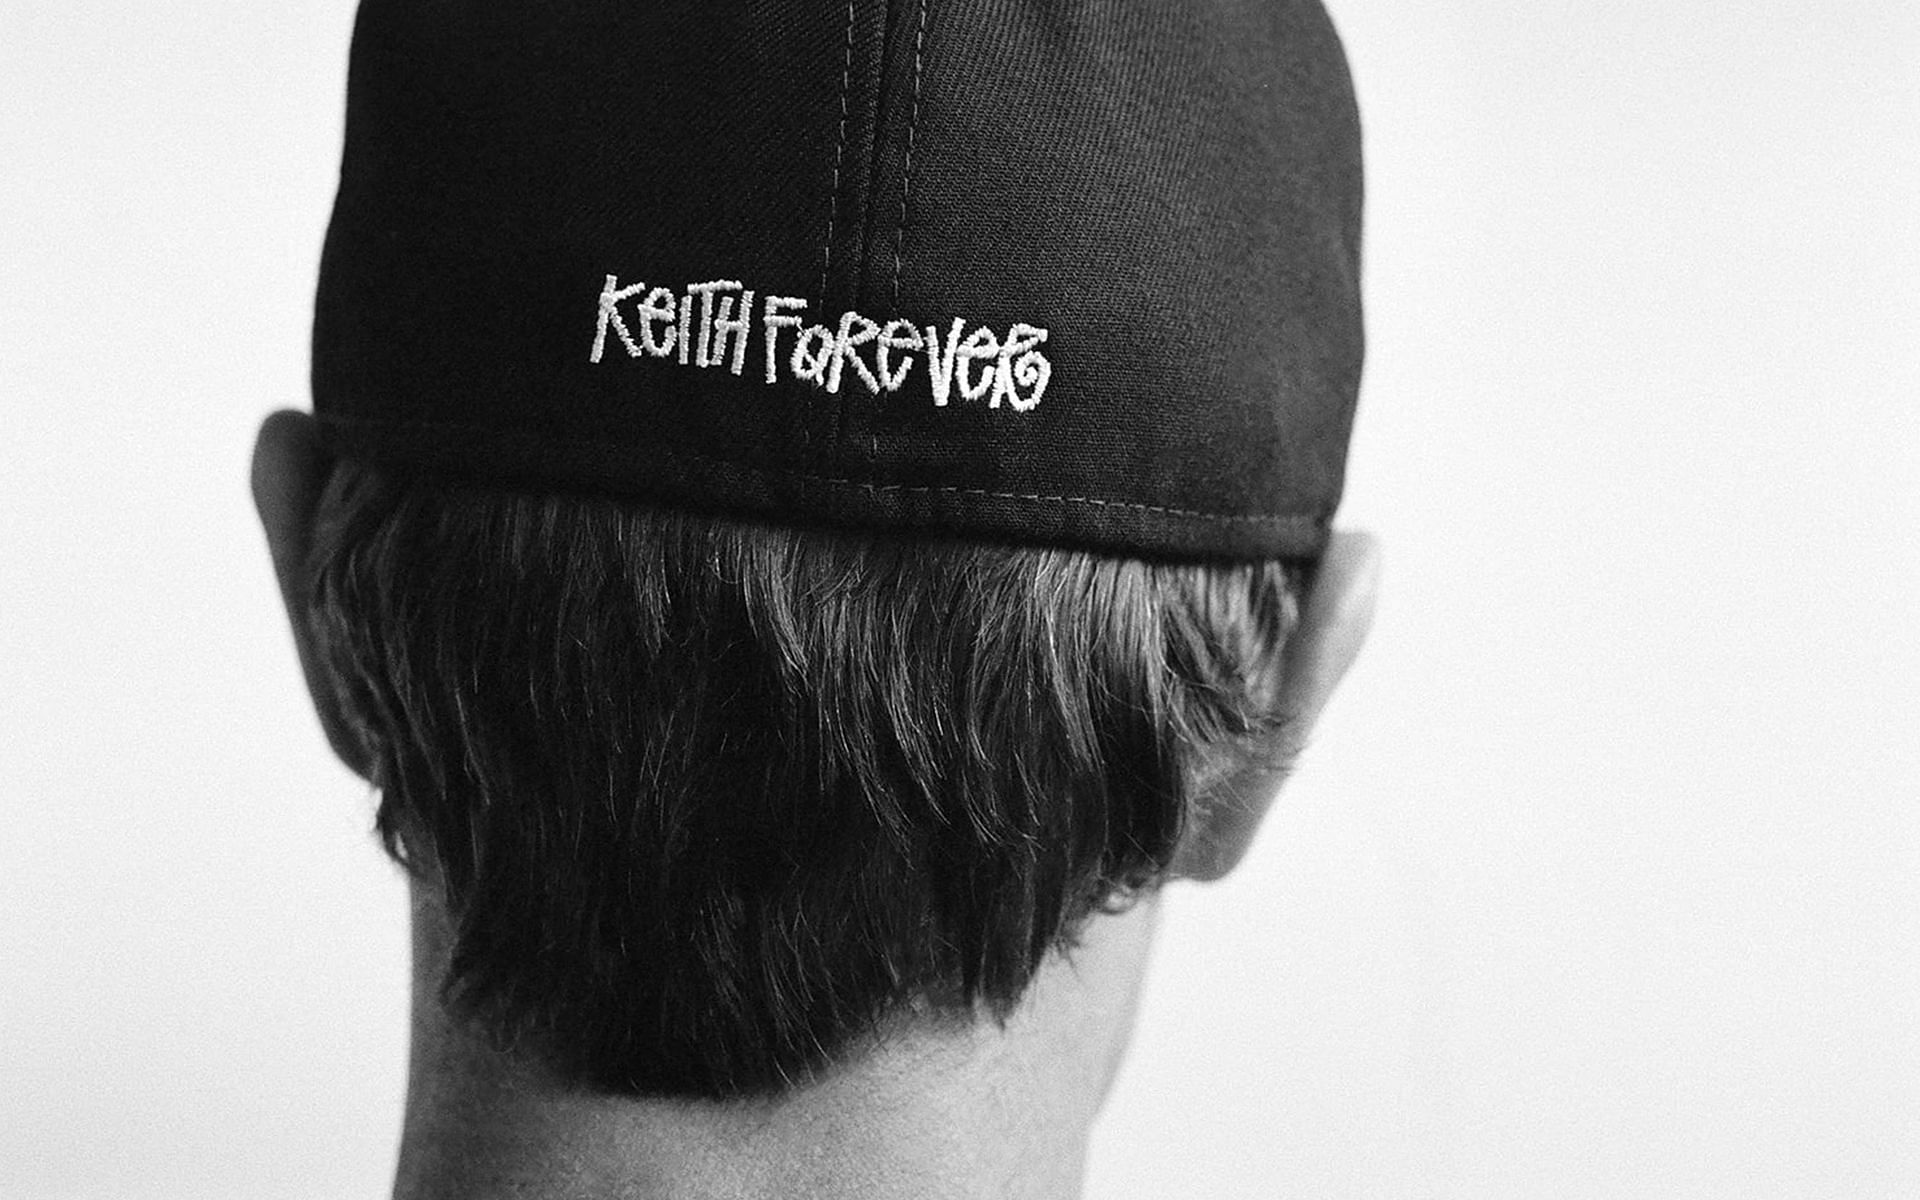 upcoming Keith Forever 2-piece capsule (Image via Stussy)